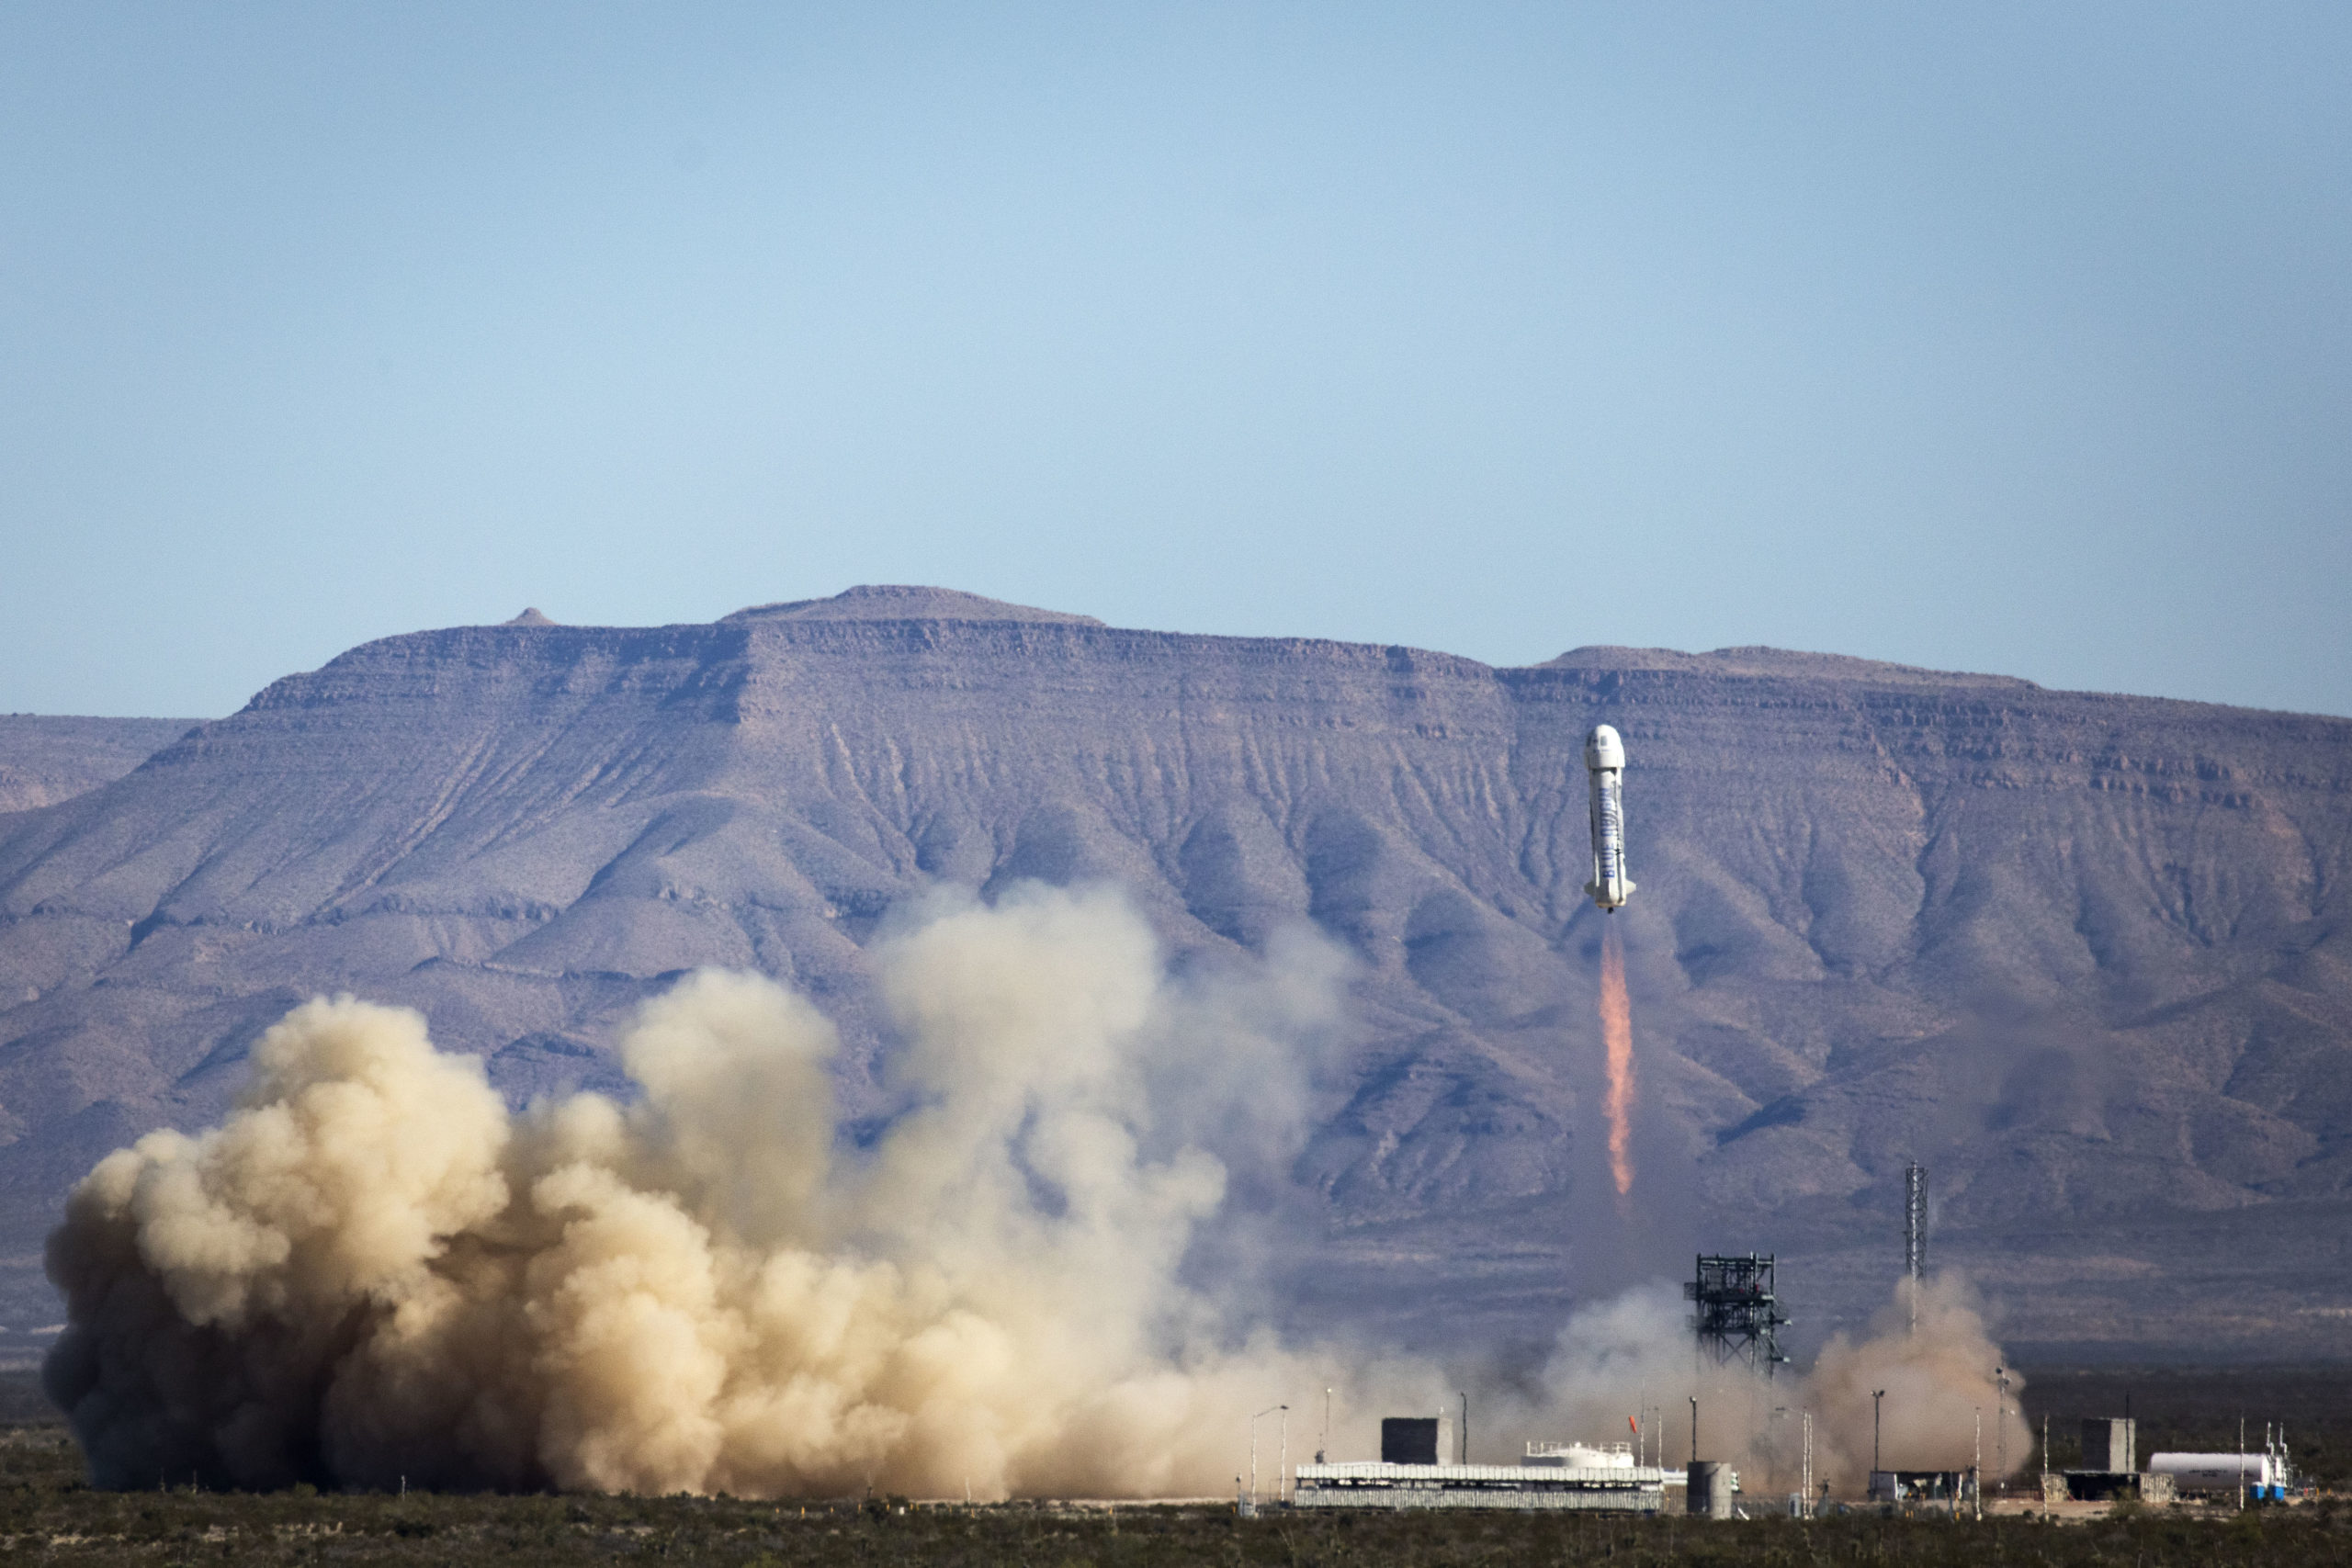 Here’s Blue Origin’s Rocket Coming In For Its Third Landing